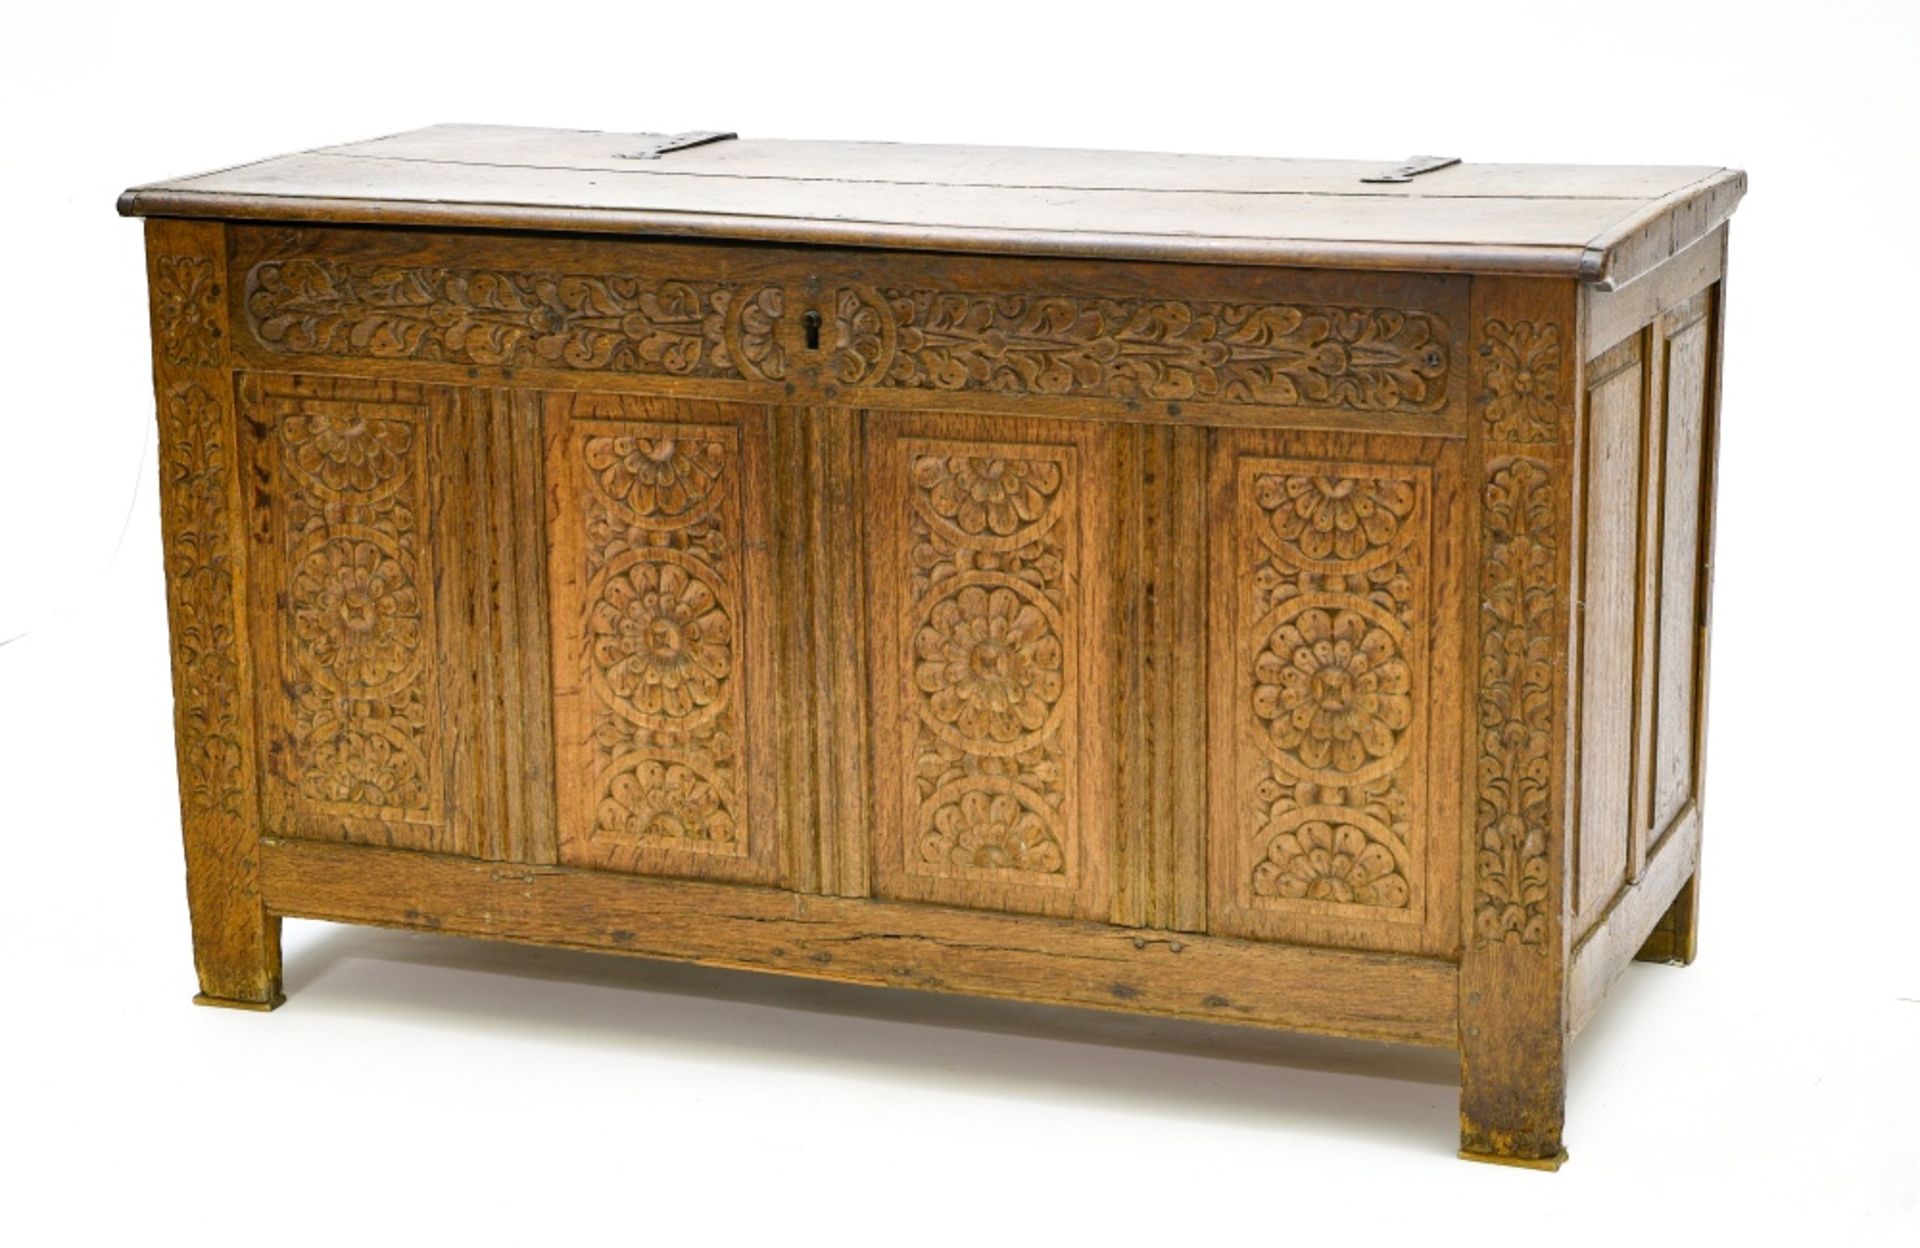 19th century work Neo-Renaissance chest, Carved oak with cast iron hinges. Height (cm) : 72 - Width